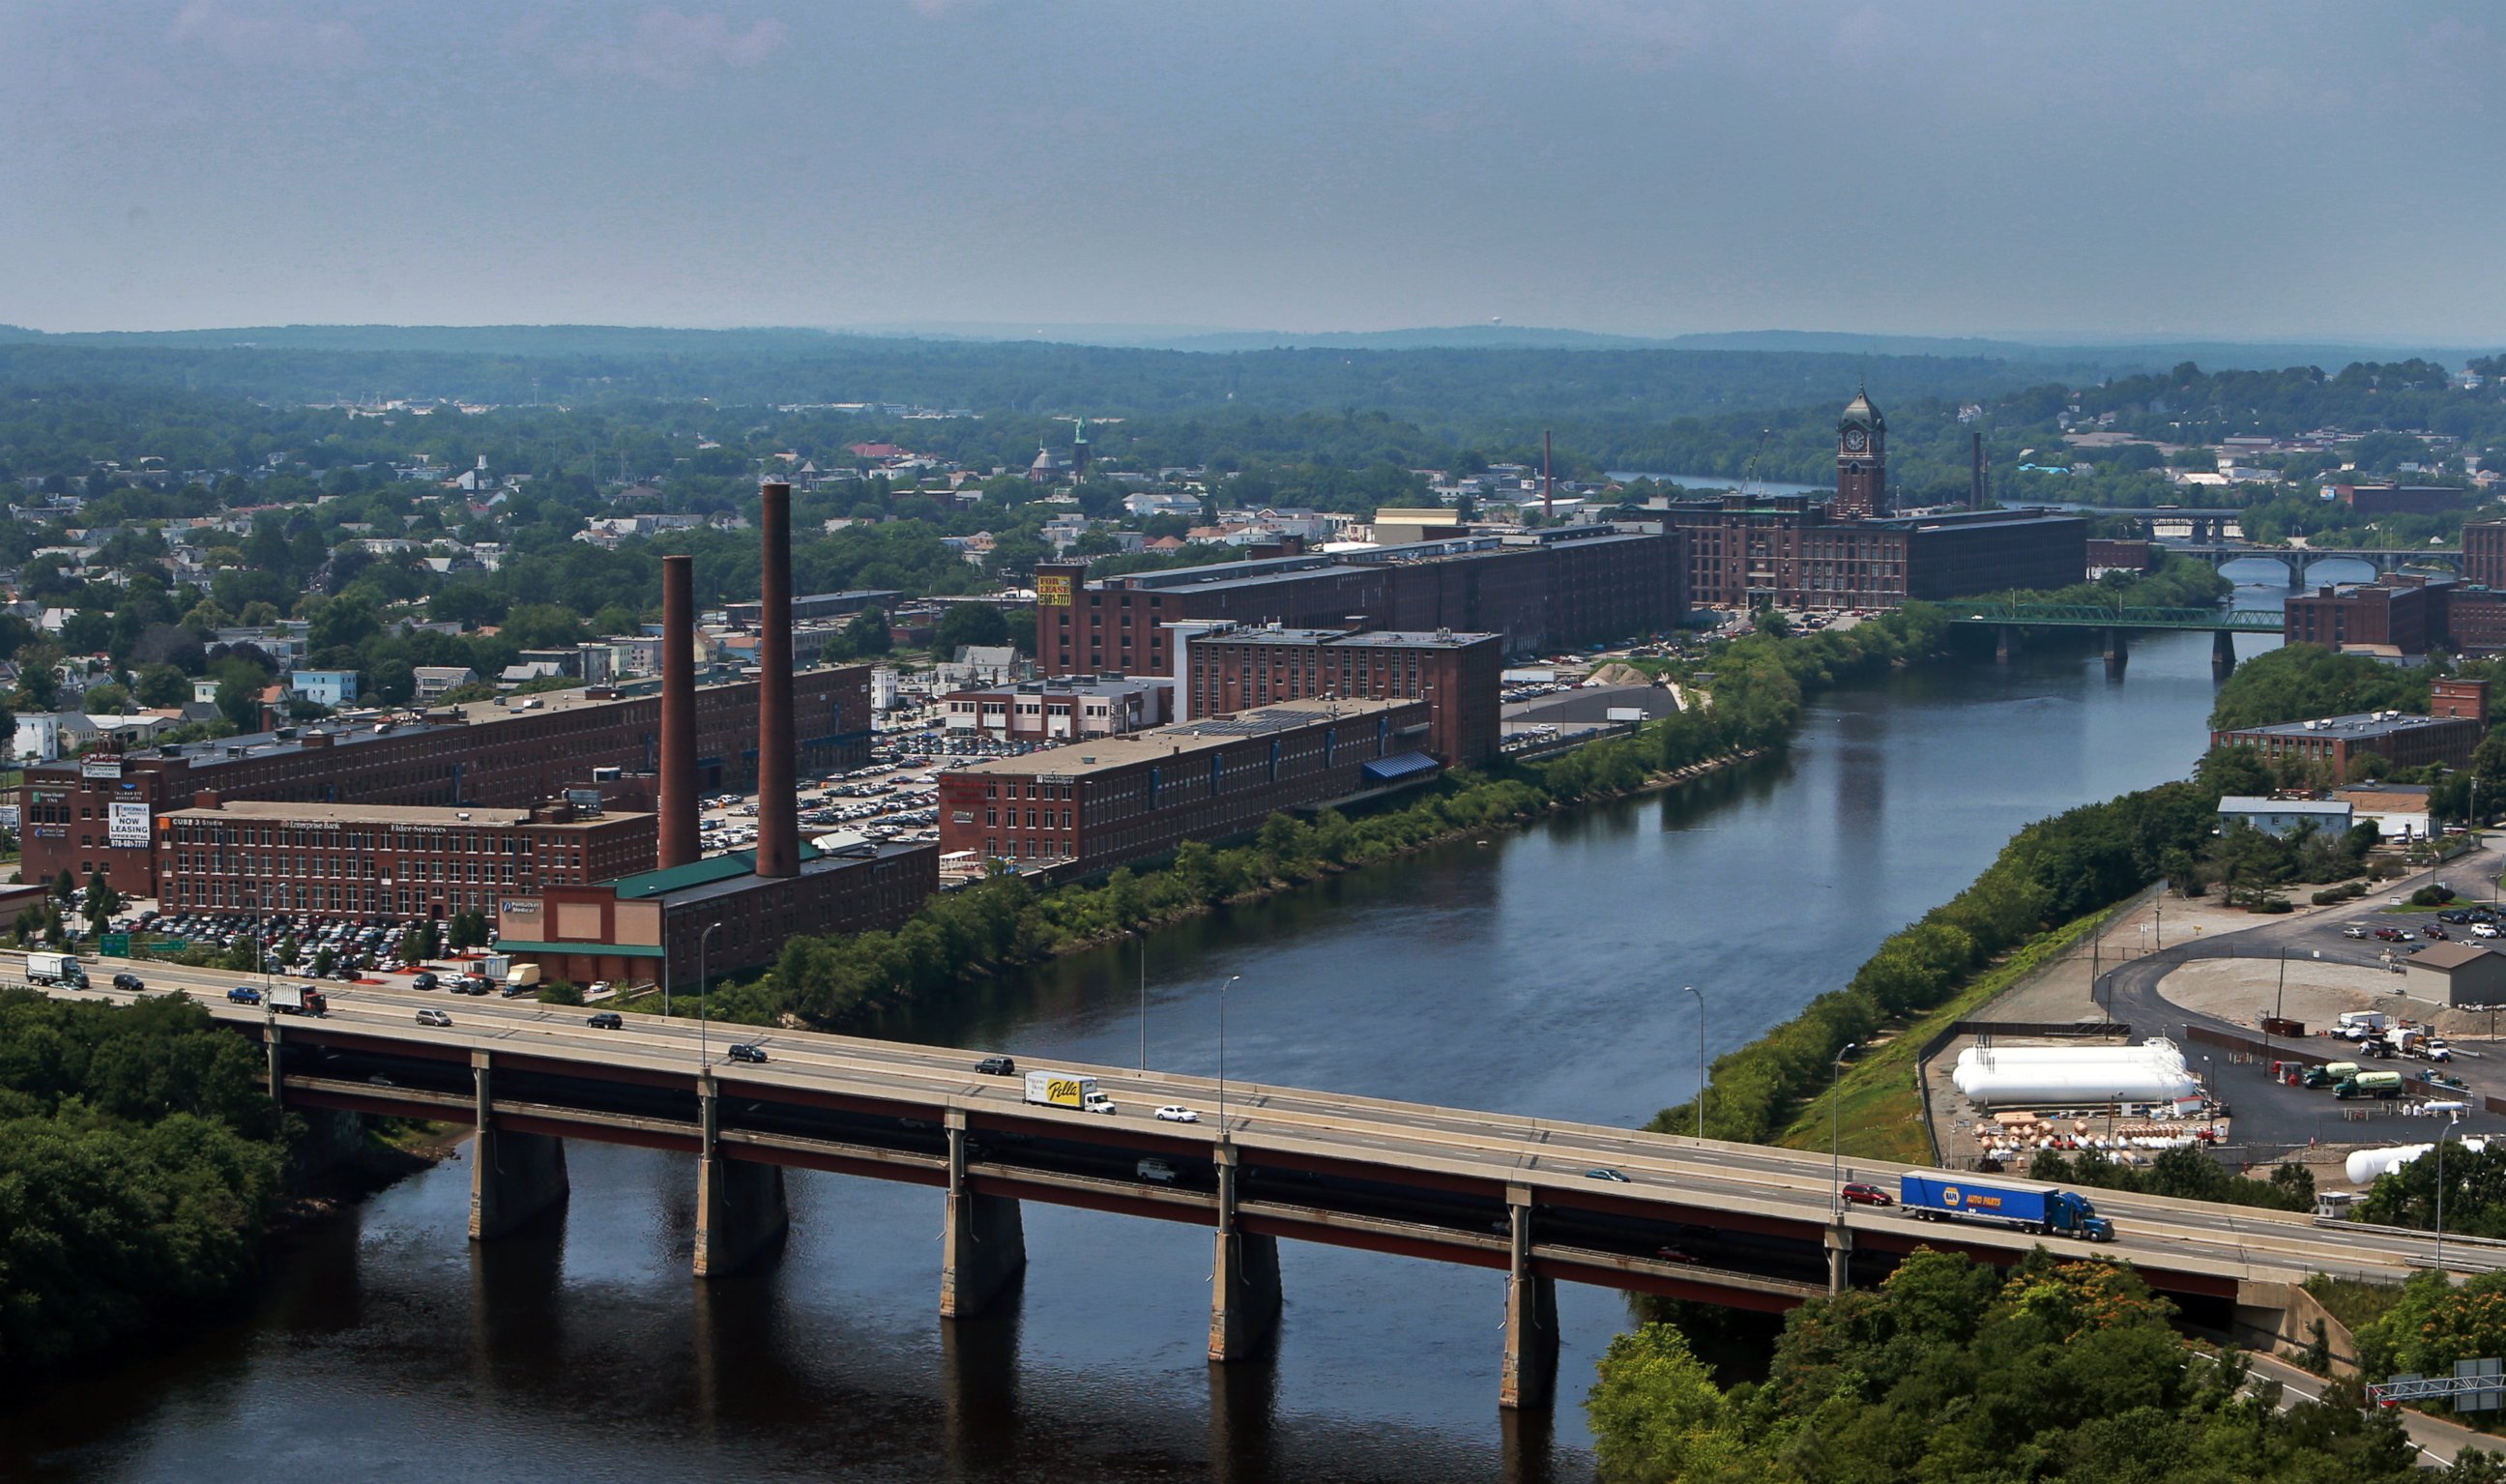 PHOTO: An aerial view of the mills along the Merrimack River in Lawrence with Route 495 in the foreground, Aug. 5, 2014.